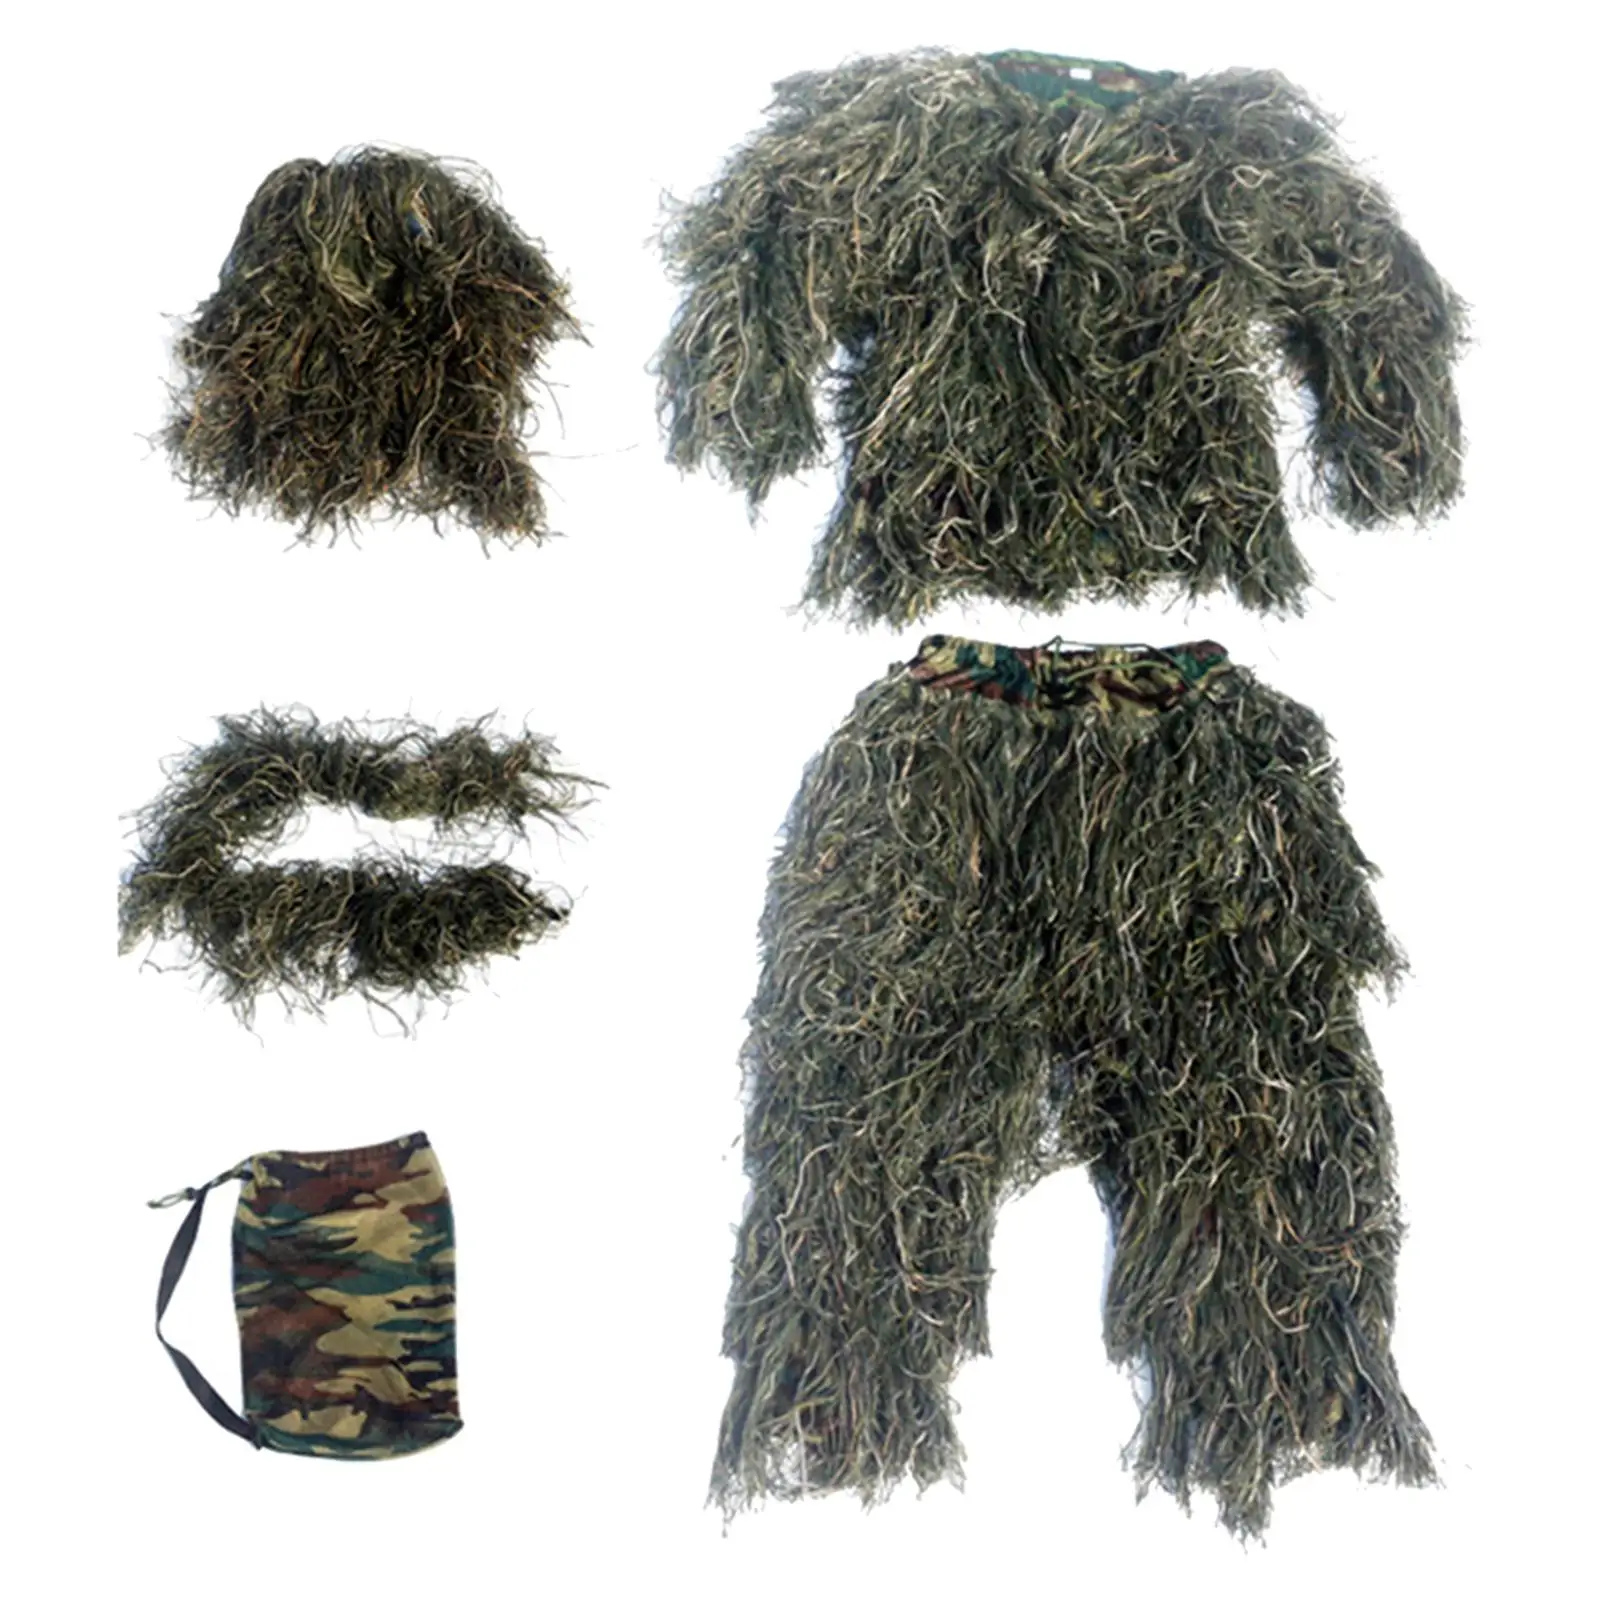 Ghillie Suit with Storage Bag Jacket Forest Outfit Lightweight Pants Hat Uniform